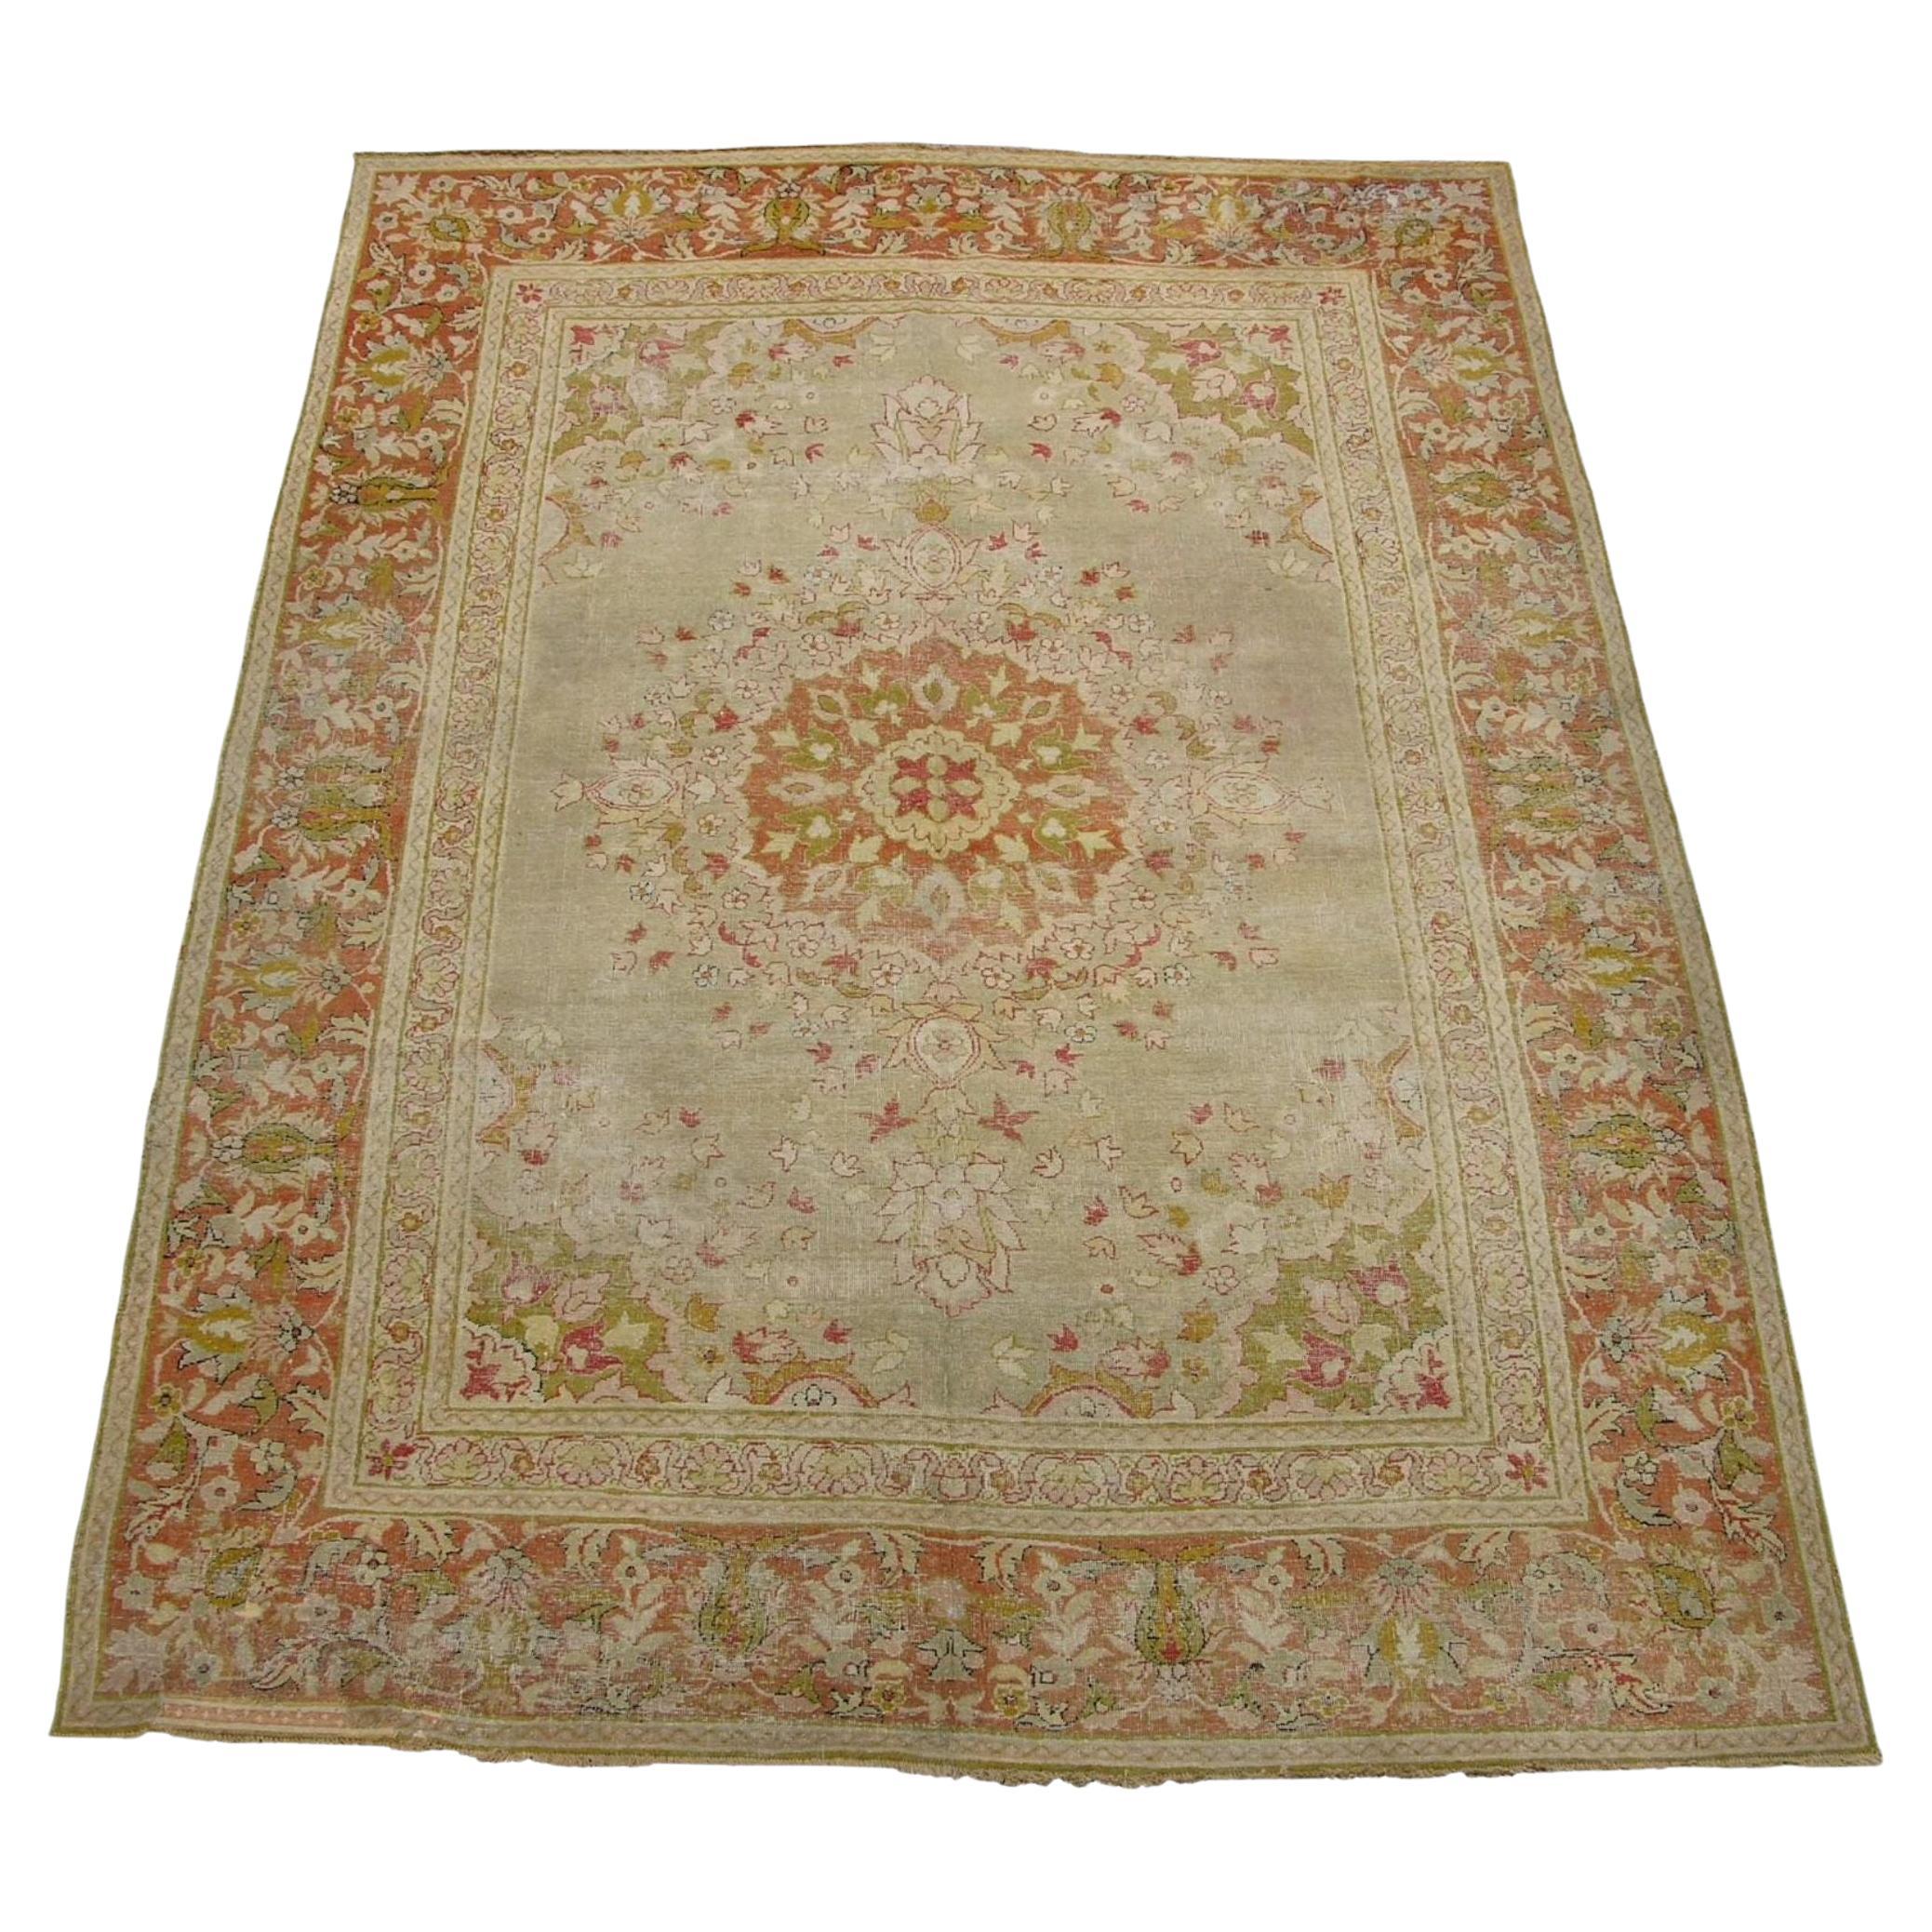 1900s Antique Indian Amritsar Rug - 10'6'' X 7'9'' For Sale